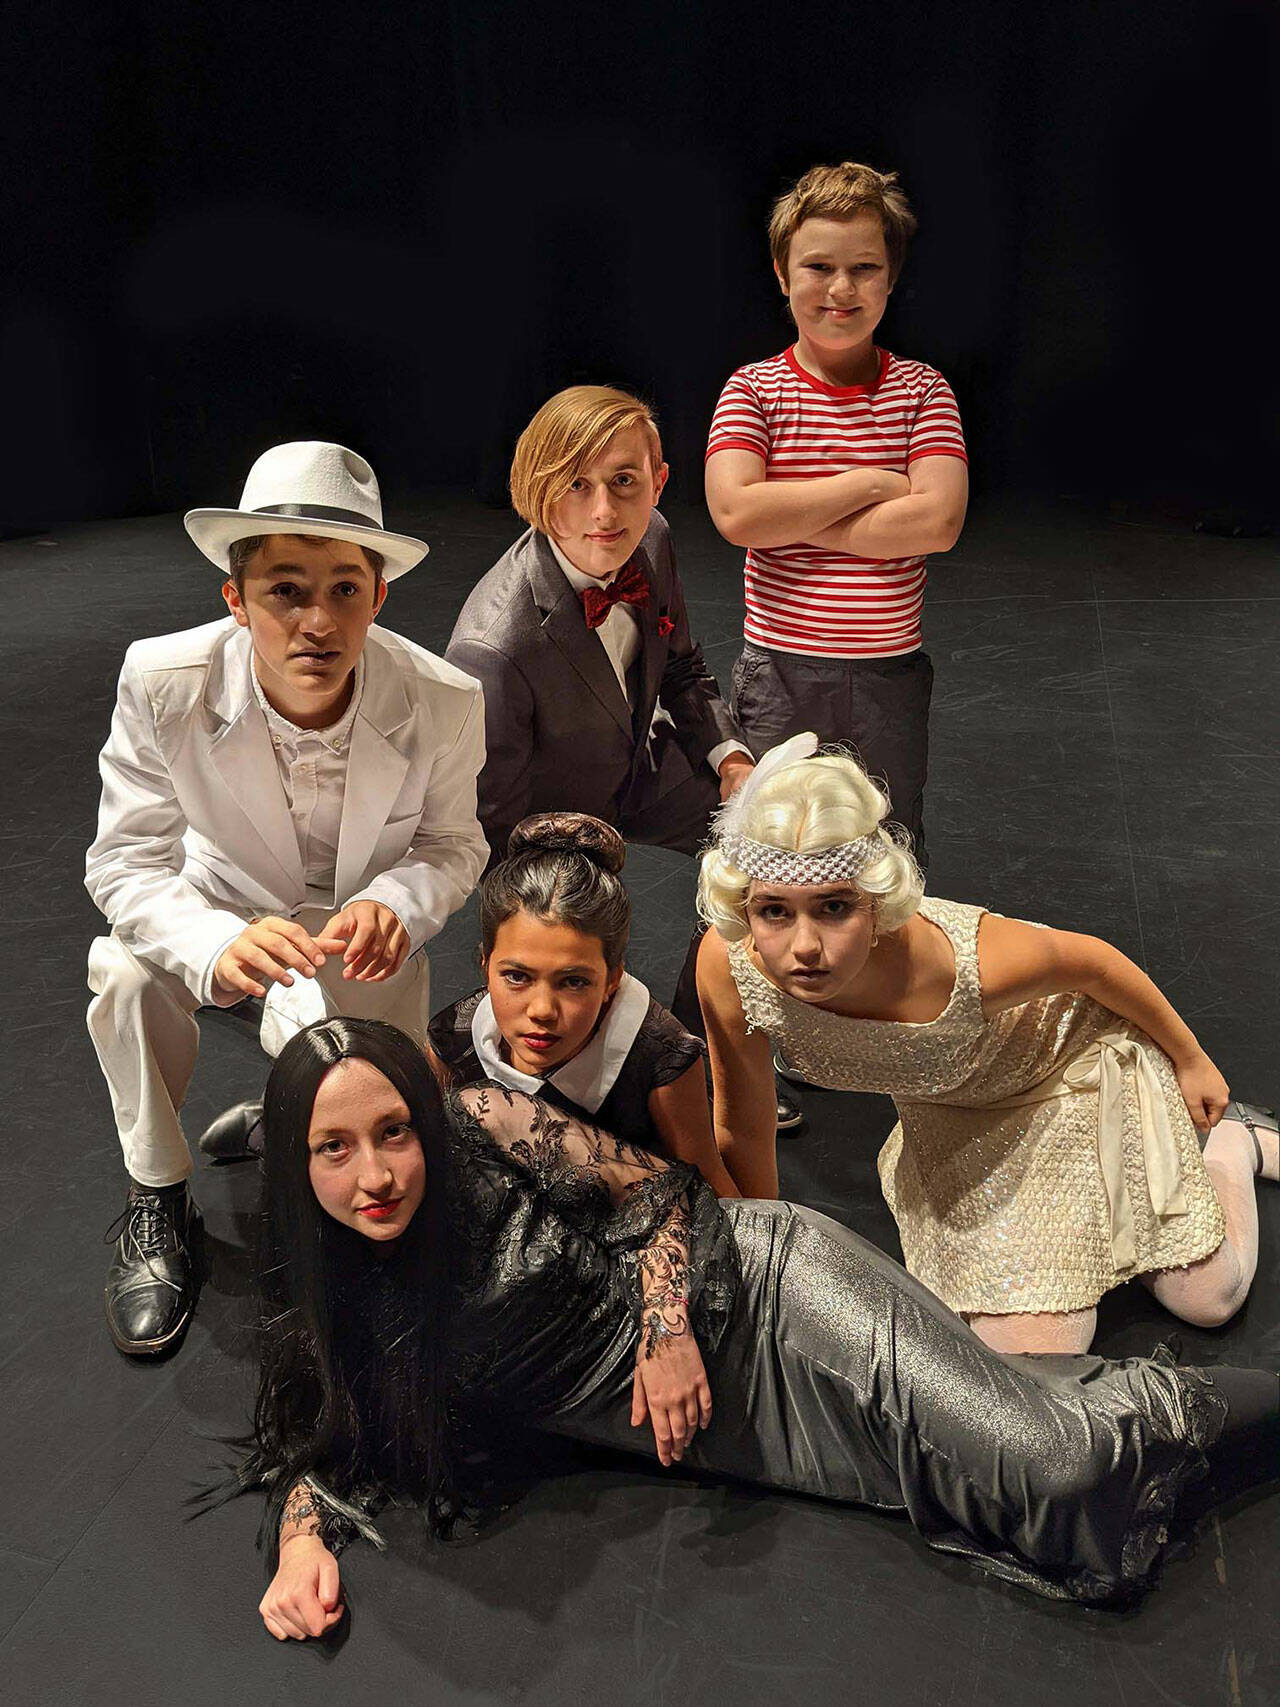 Courtesy Photo
Drama Dock’s production of ‘The Addams Family” will be performed at 7 p.m. Friday, Nov. 19, and 1 p.m. Saturday, Nov. 20, at VCA. Tickets are on sale now at vashoncenterforthearts.org.